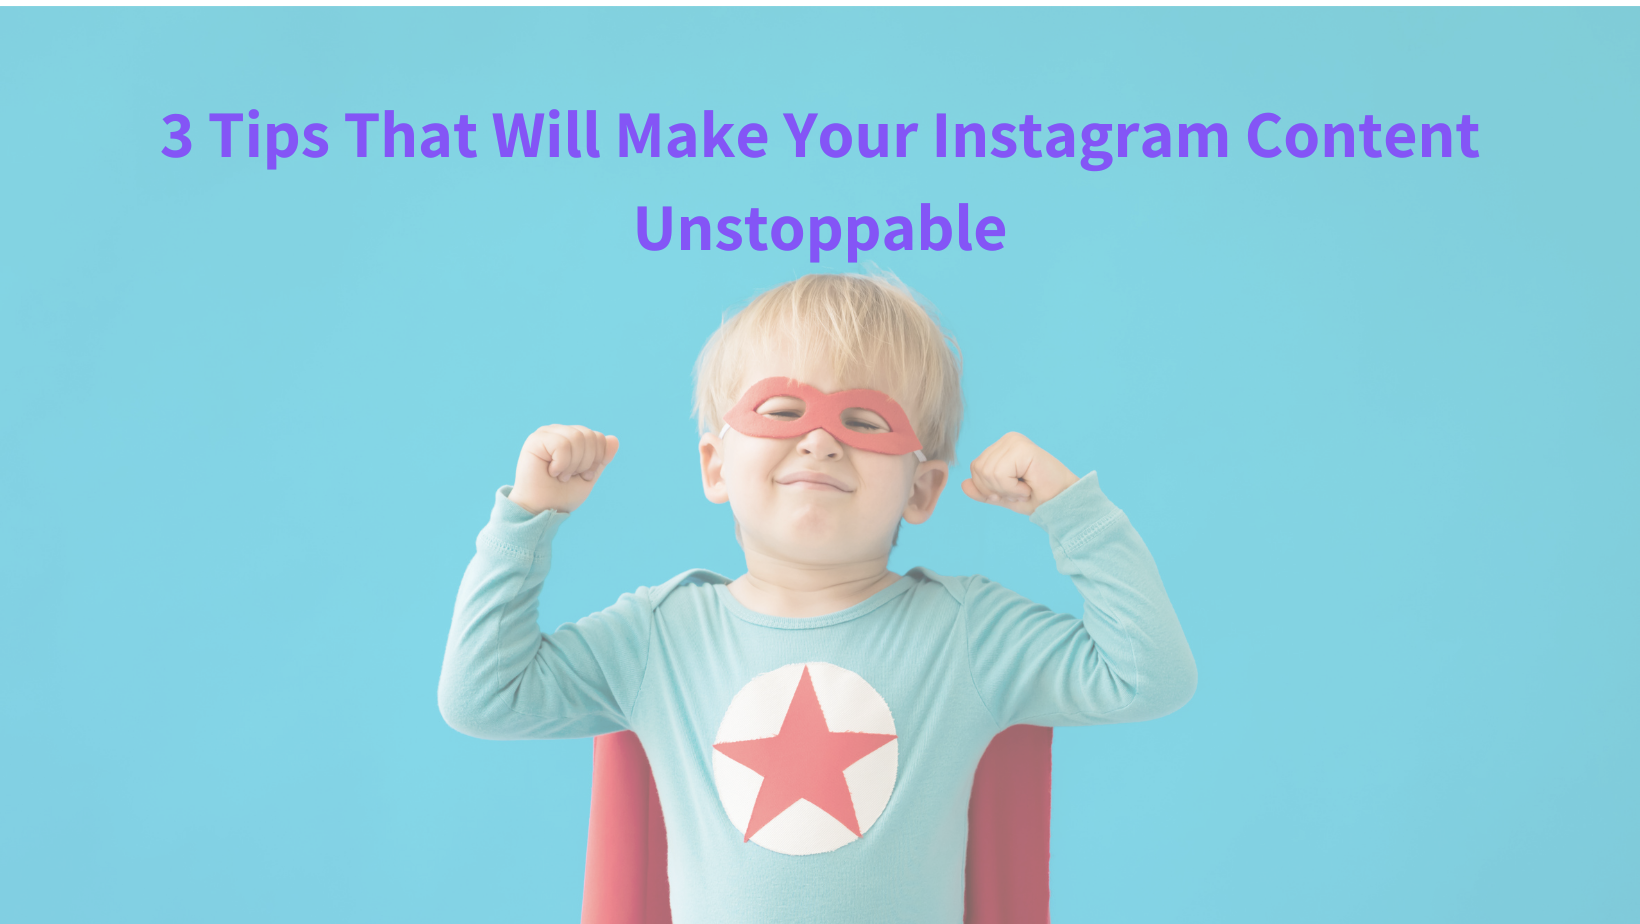 Make Your Instagram Content Unstoppable